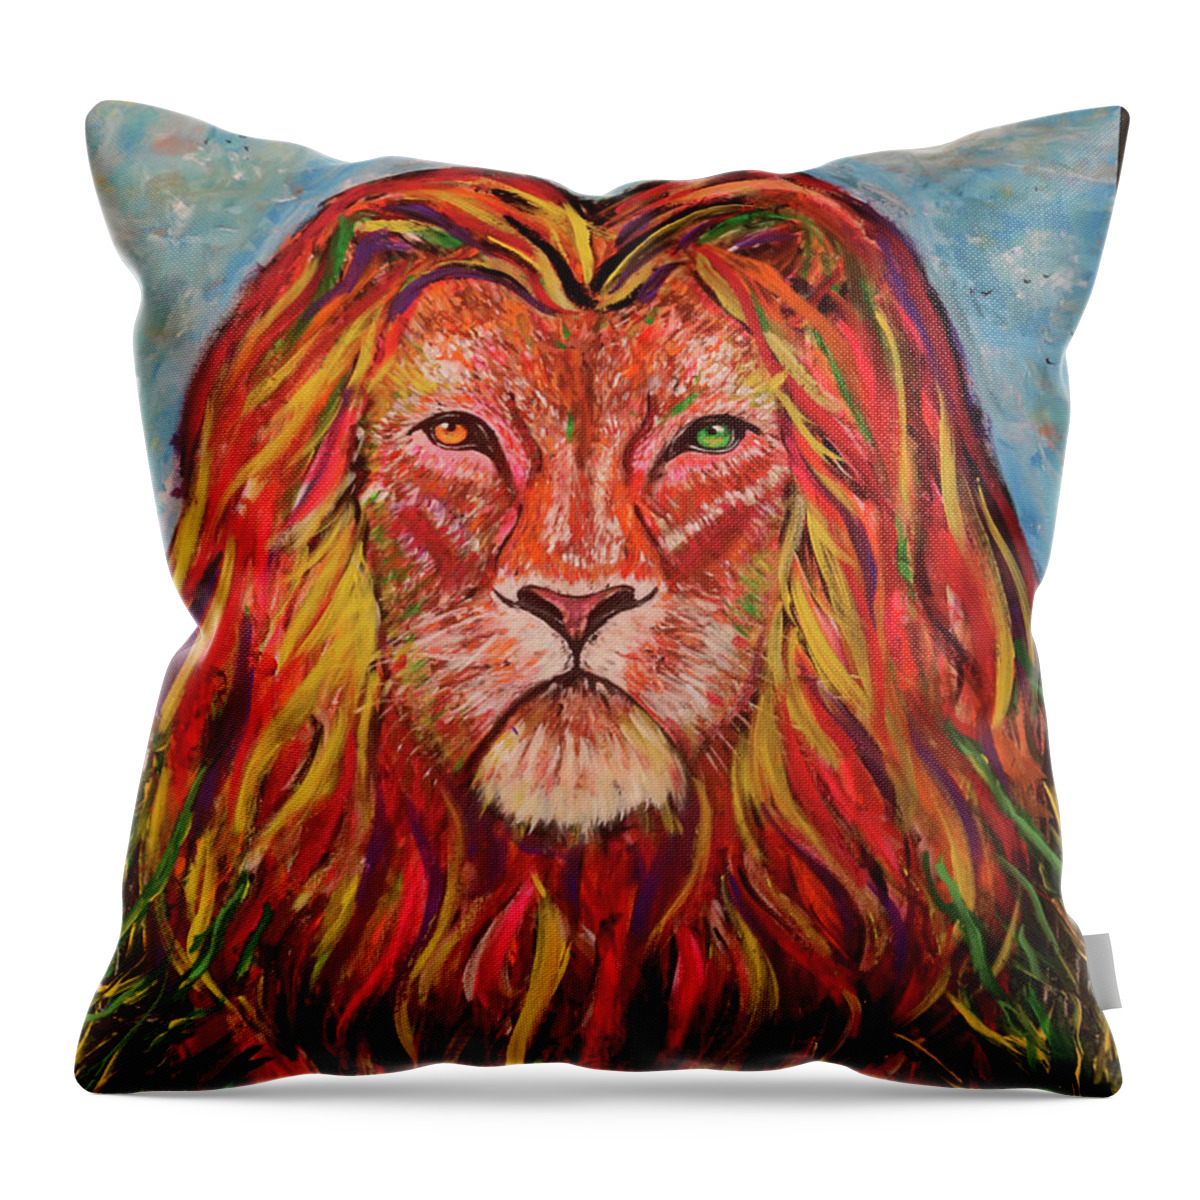 Lion King Painting Throw Pillow featuring the painting Lion King by Jeff Jeudy